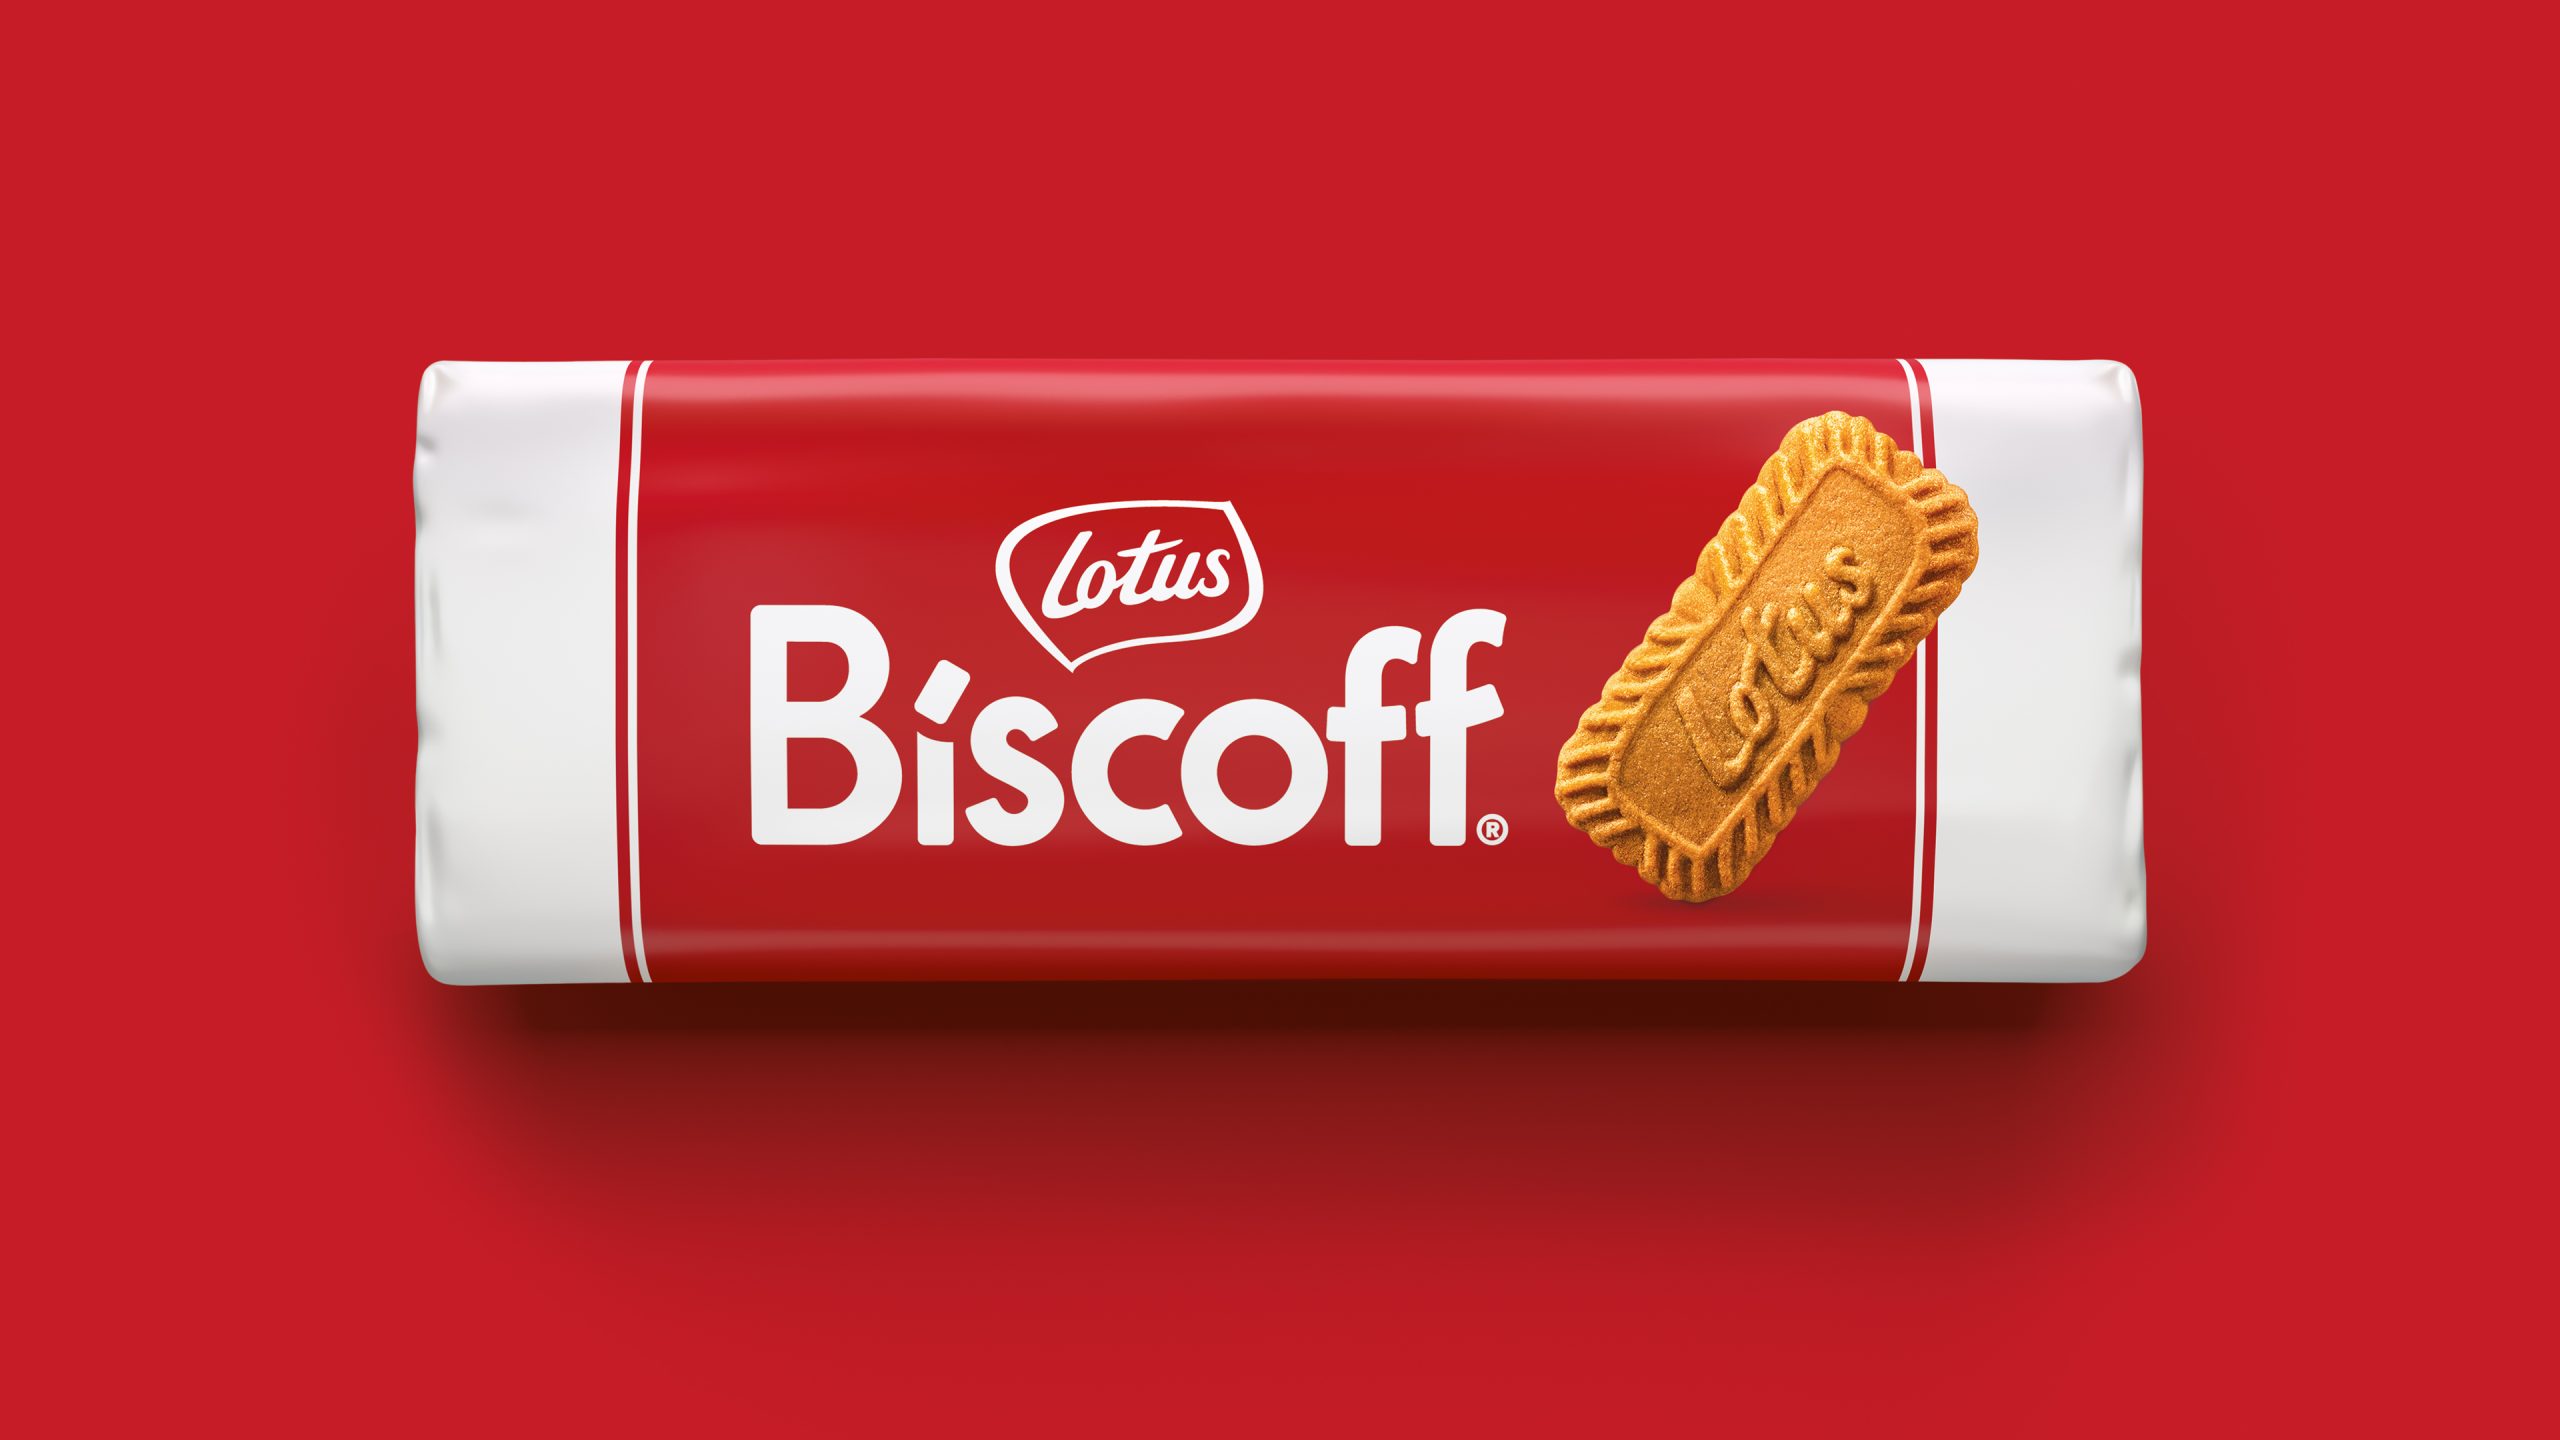 Lotus Biscoff Simplifies Their Look with a Clean-Cut Redesign